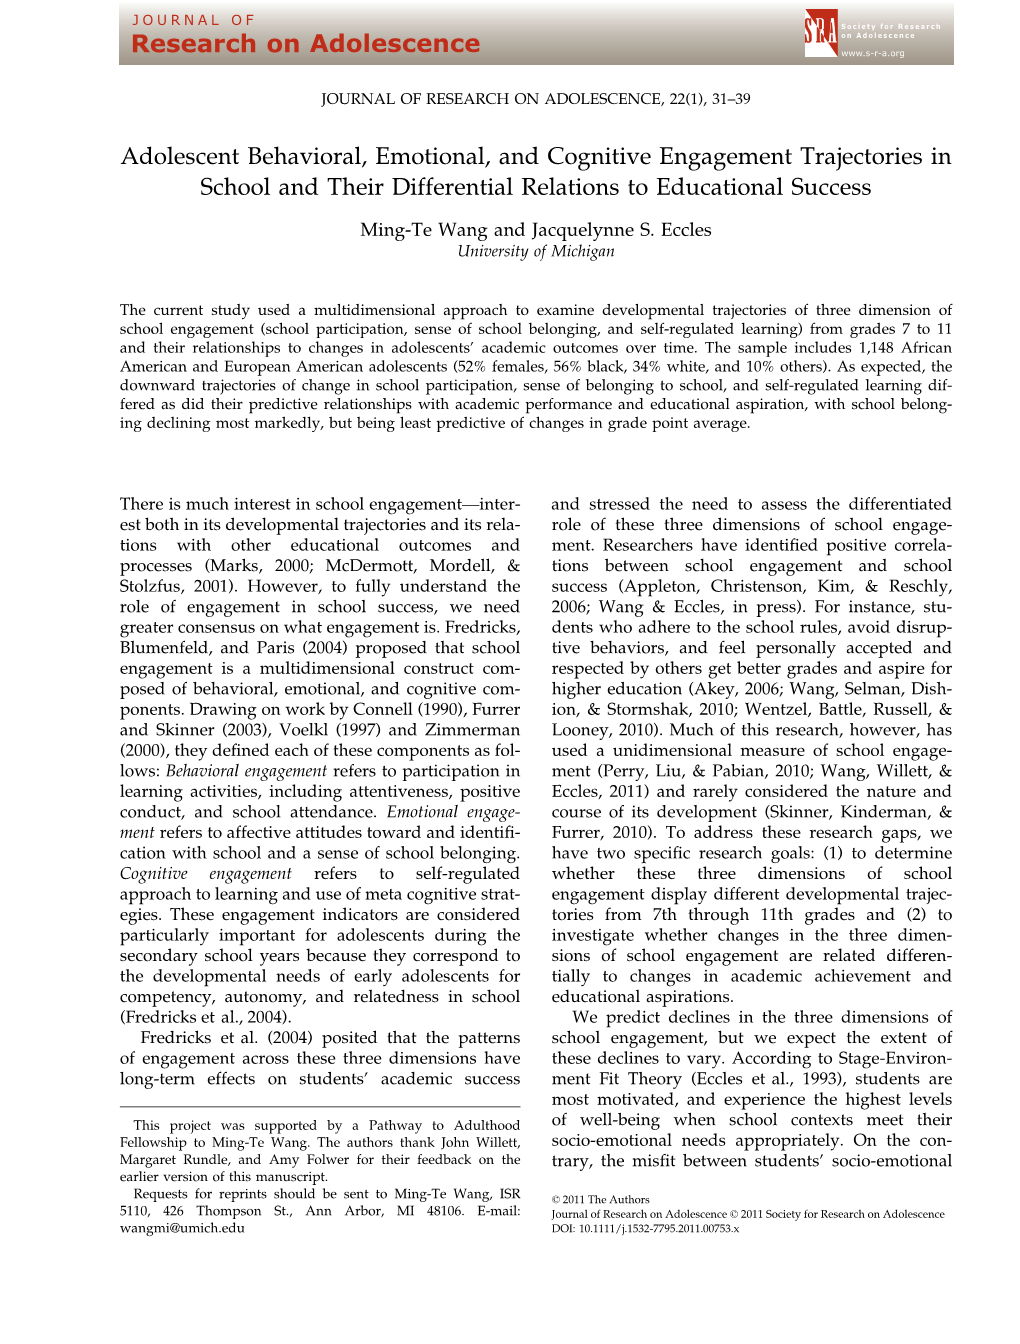 Adolescent Behavioral, Emotional, and Cognitive Engagement Trajectories in School and Their Differential Relations to Educational Success